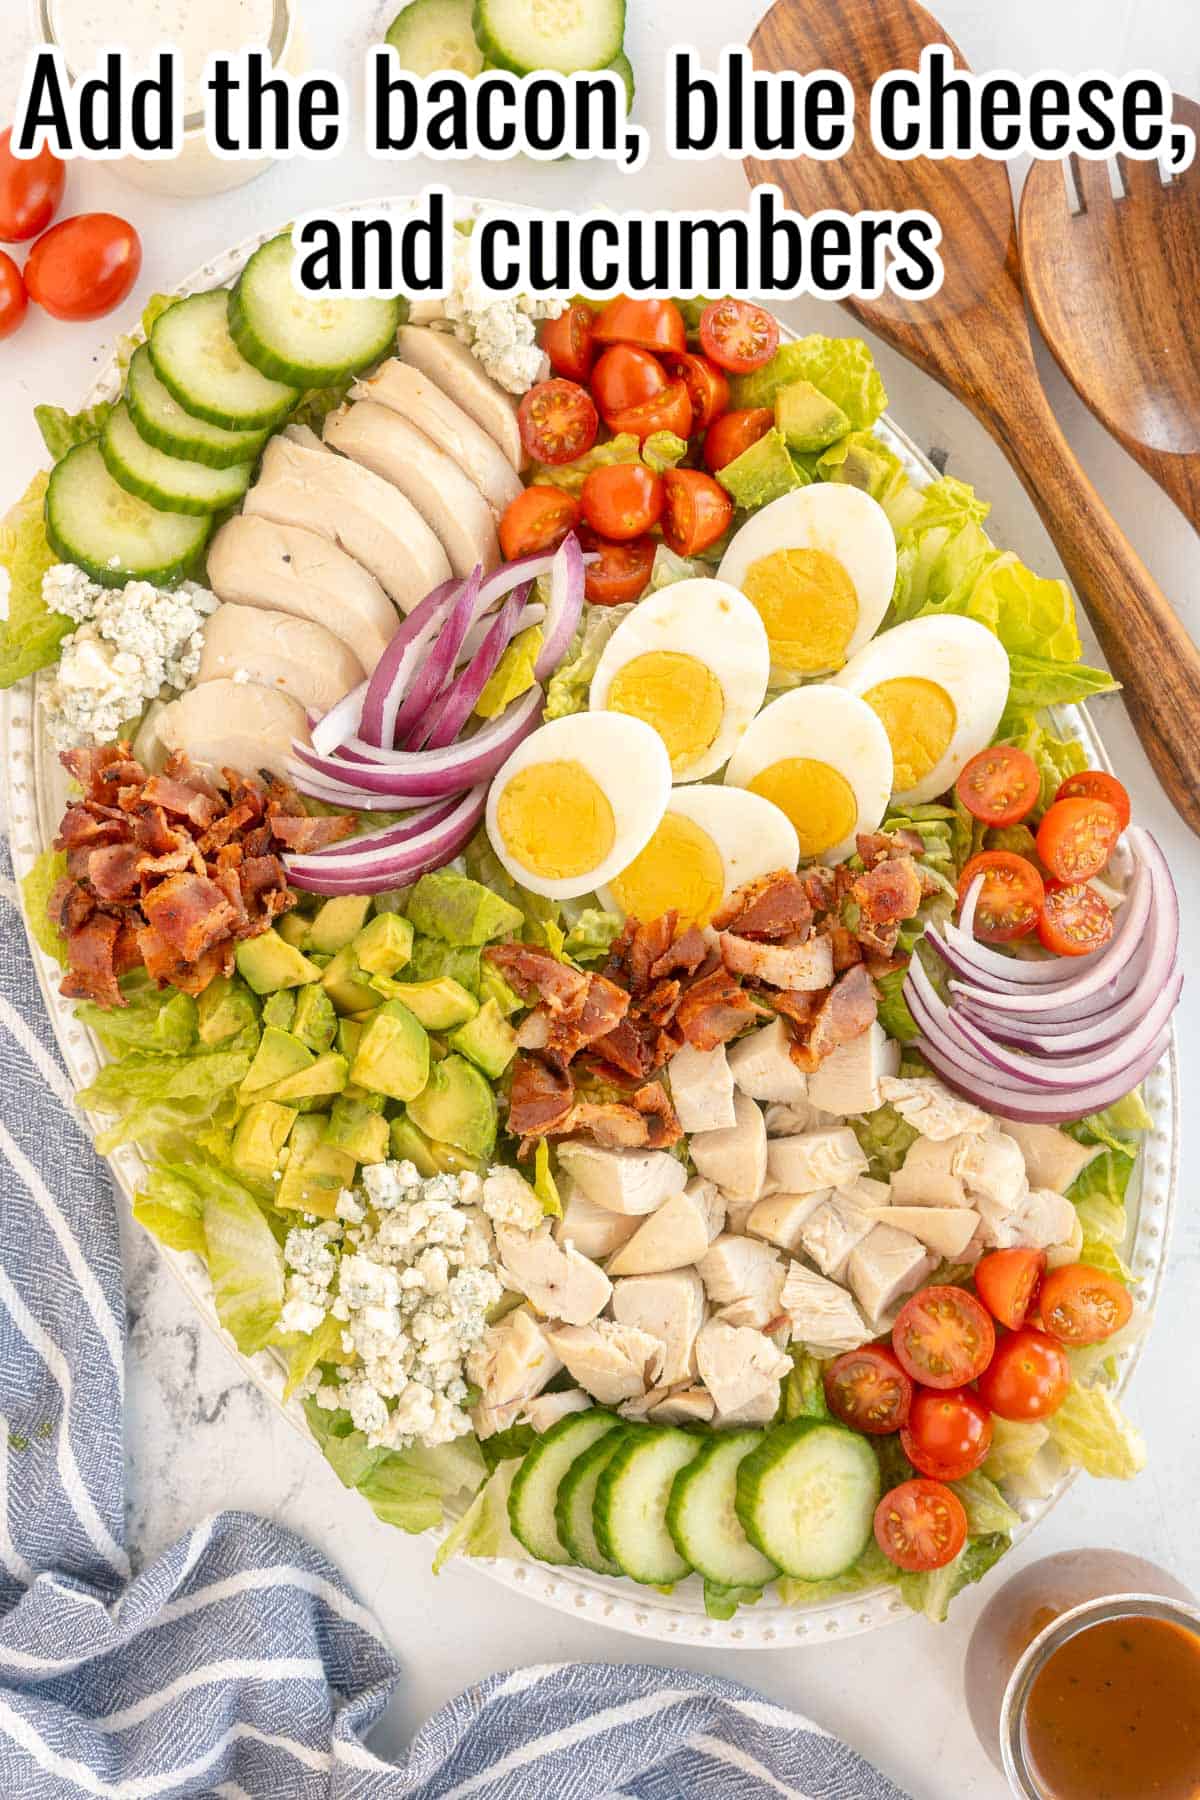 Platter with lettuce, chicken, eggs, tomatoes, onions. bacon and blue cheese.